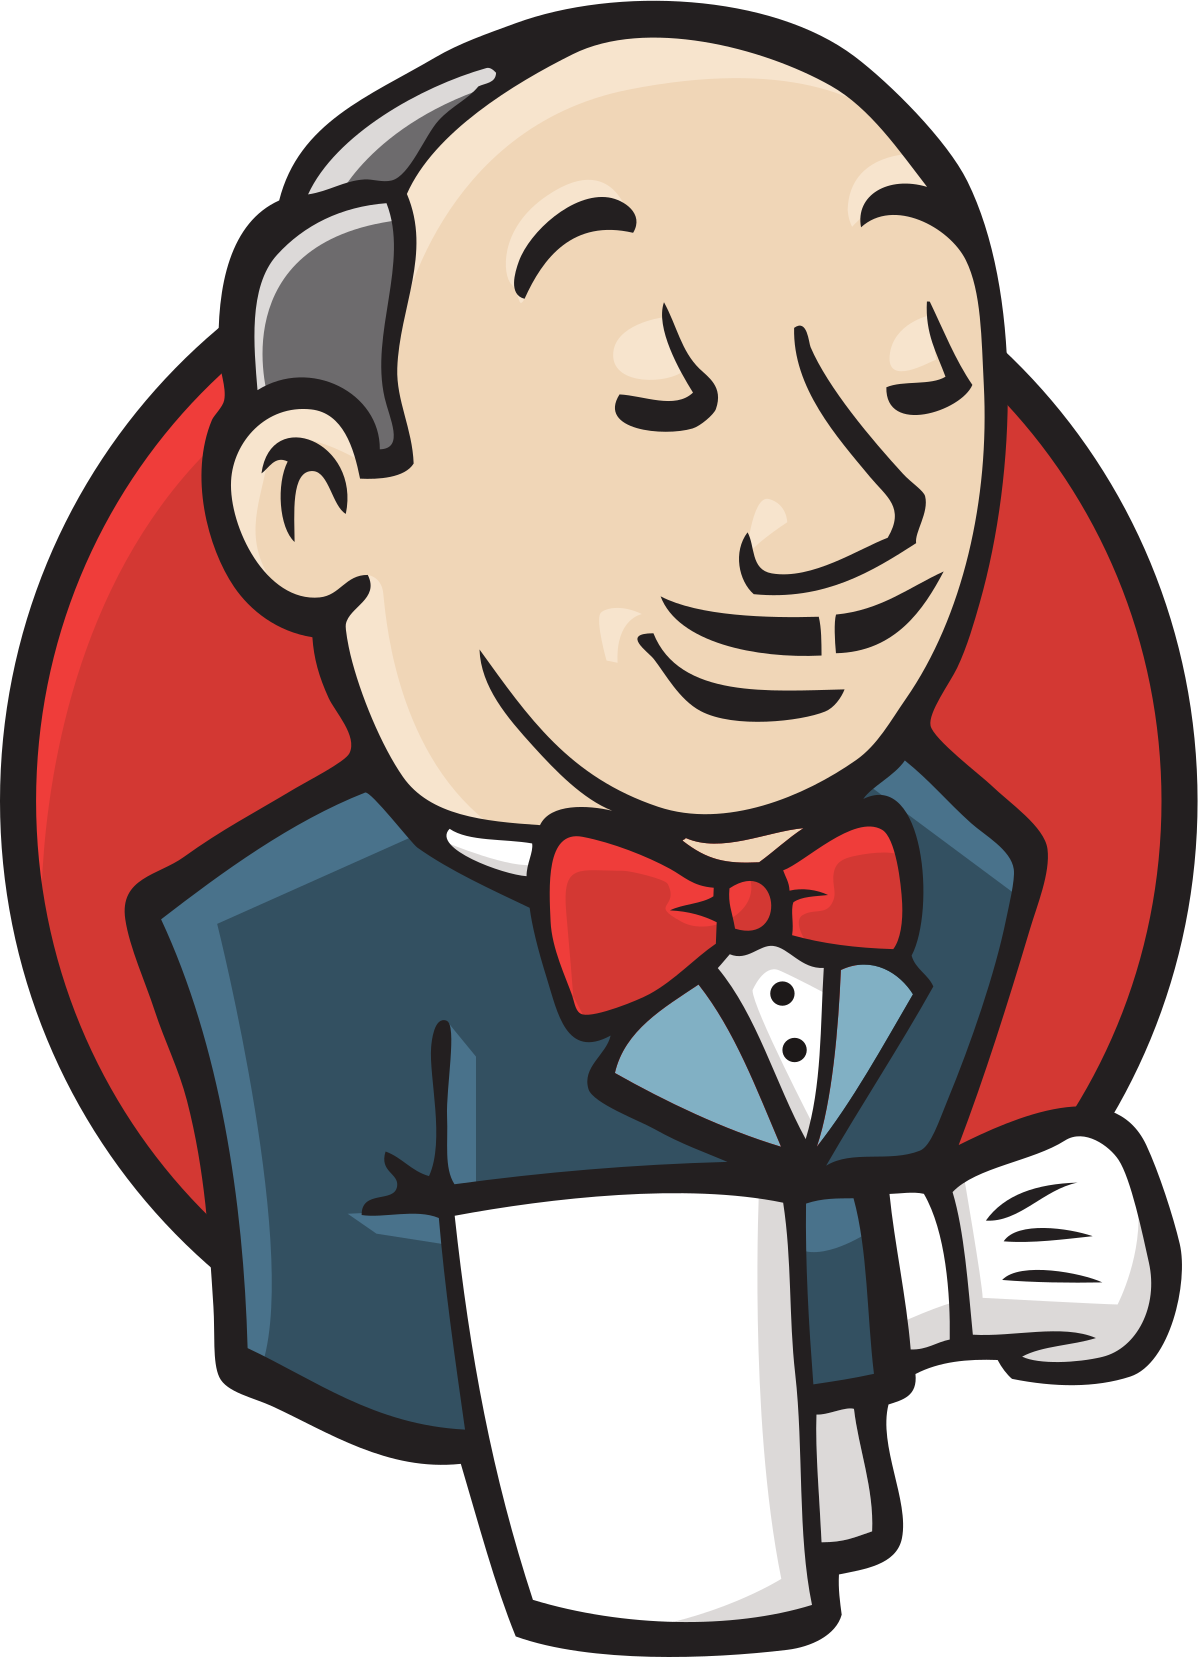 Logo of Jenkins - open-source automation tool